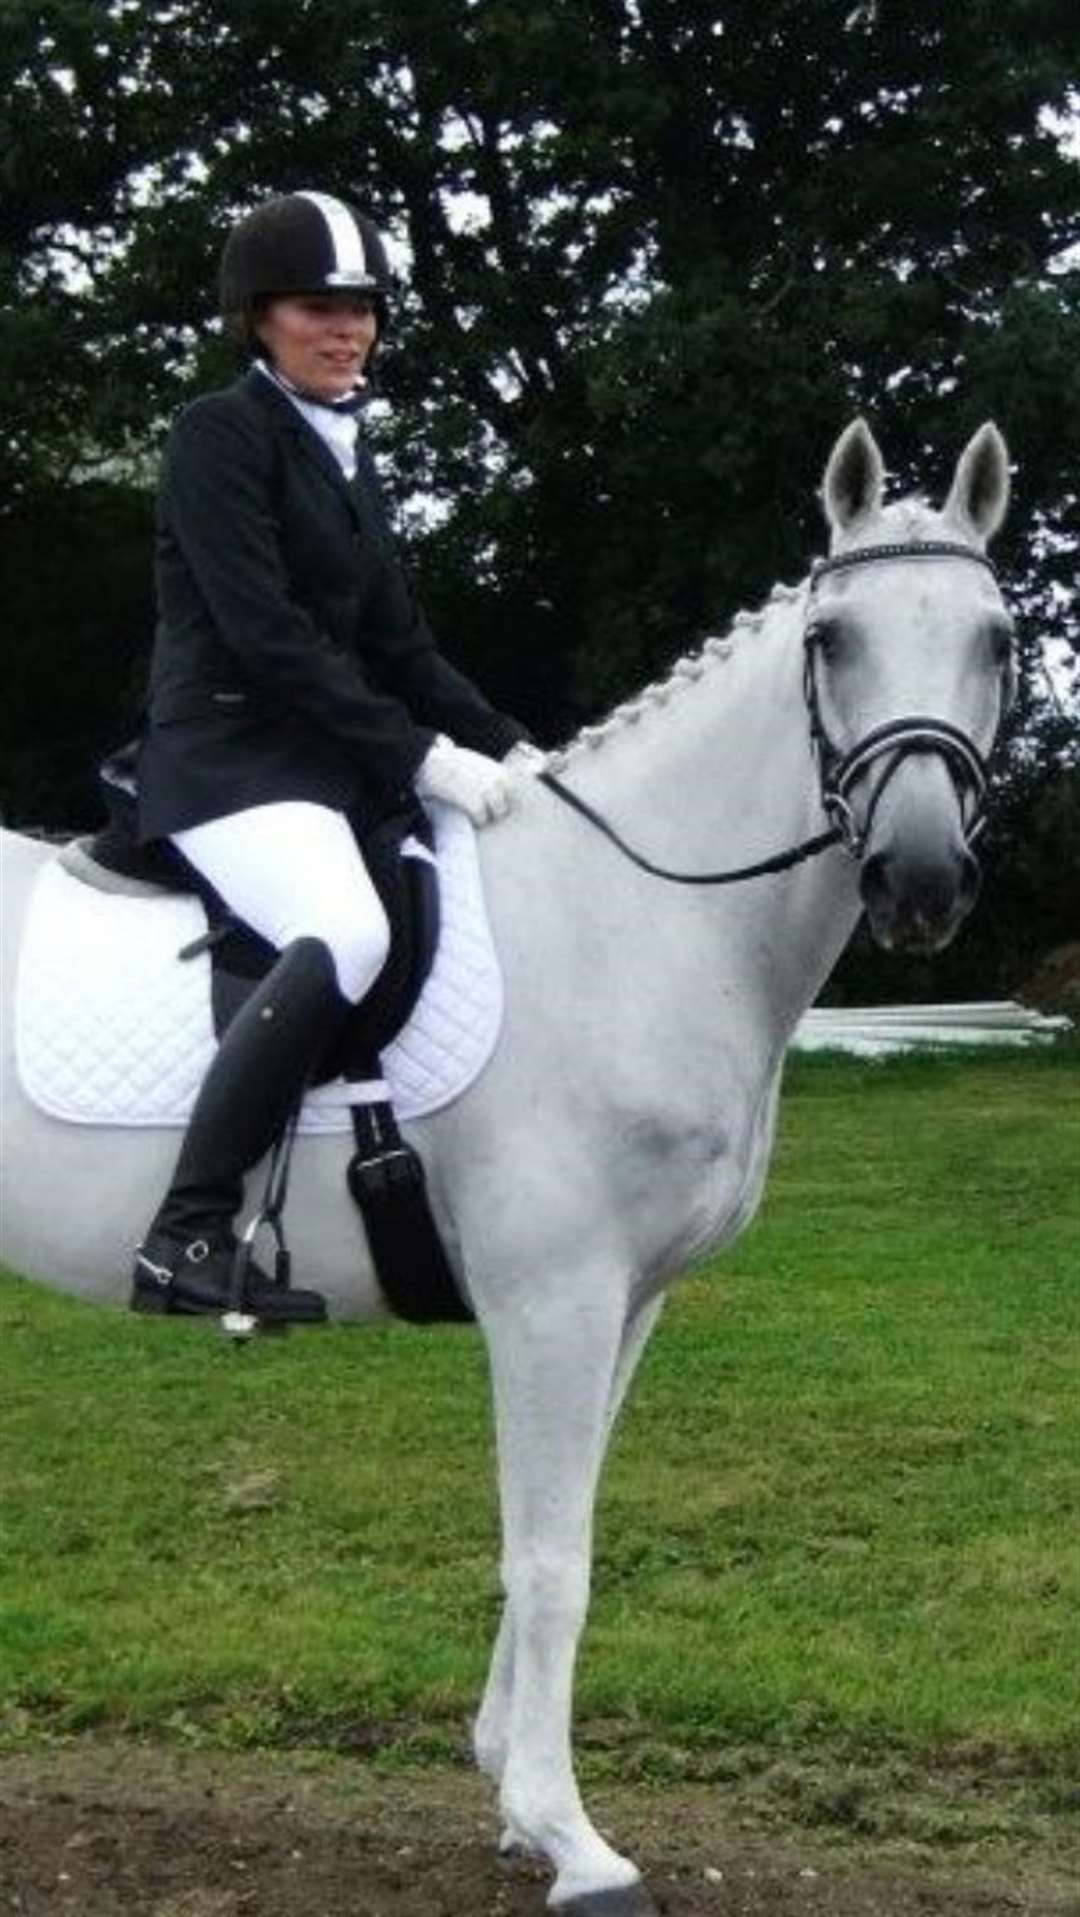 Natalie Louise Compson on Silver Fox at Hickstead in 2012